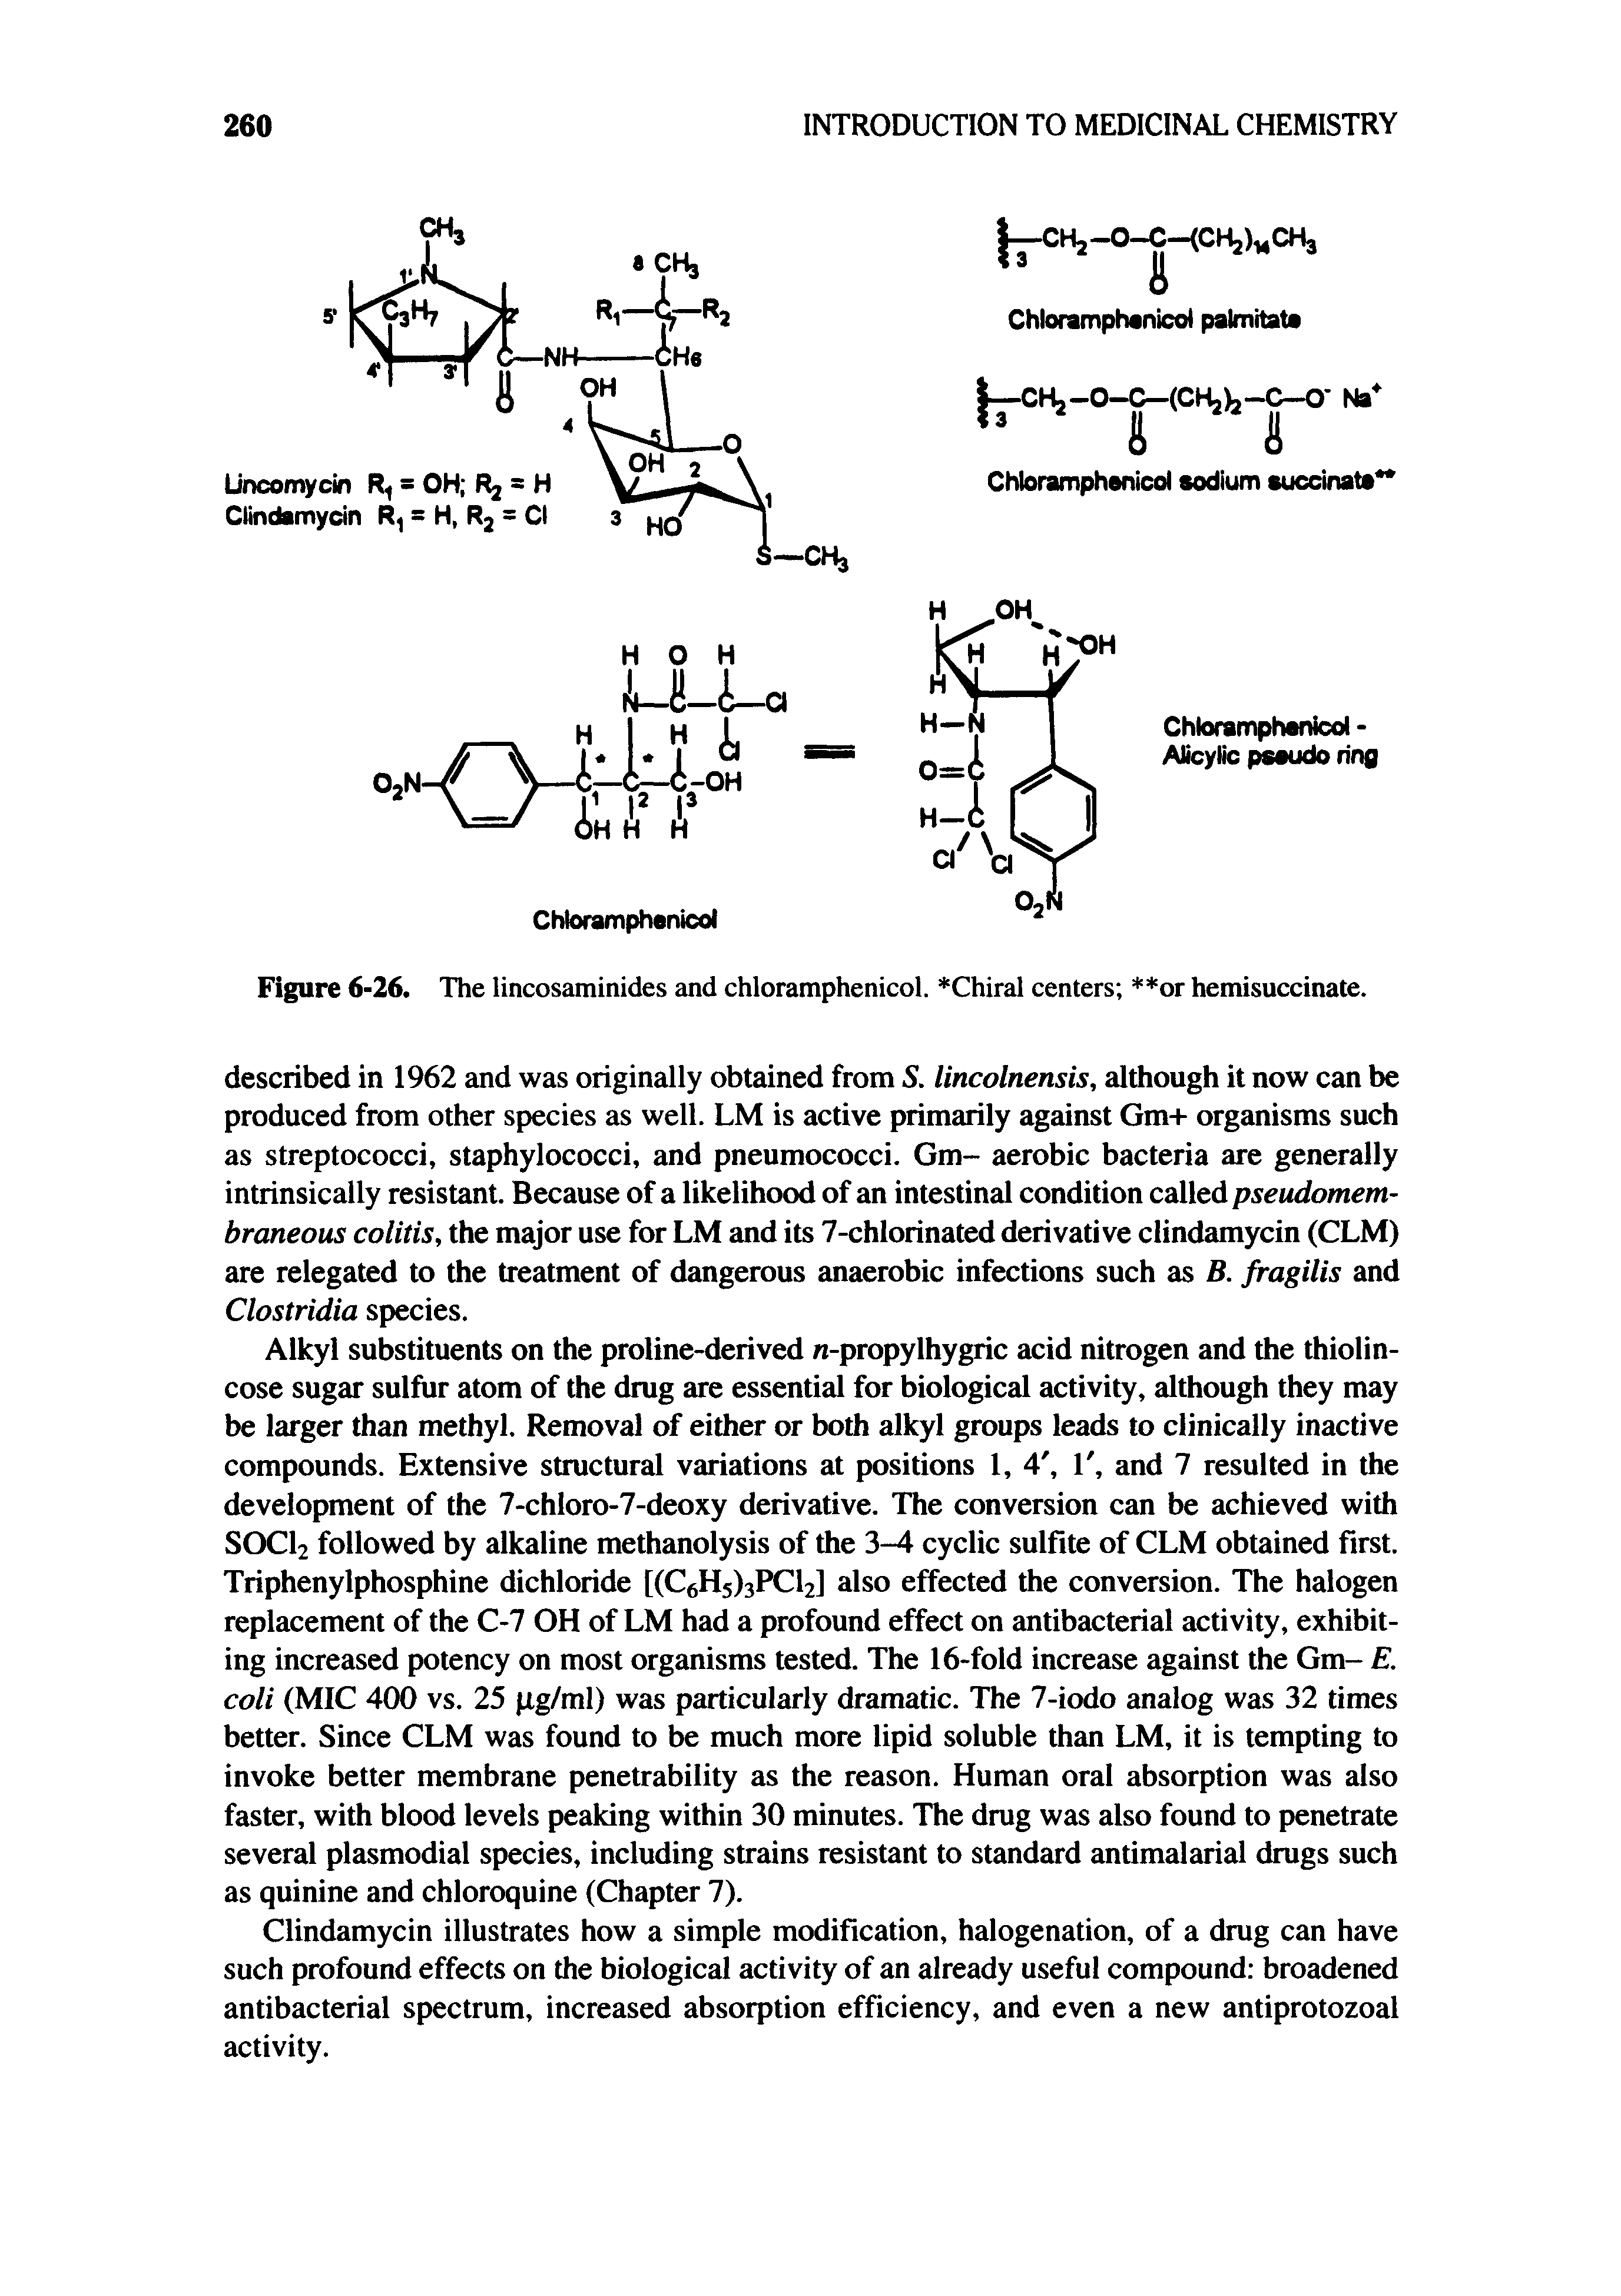 Figure 6-26. The lincosaminides and chloramphenicol. Chiral centers or hemisuccinate.